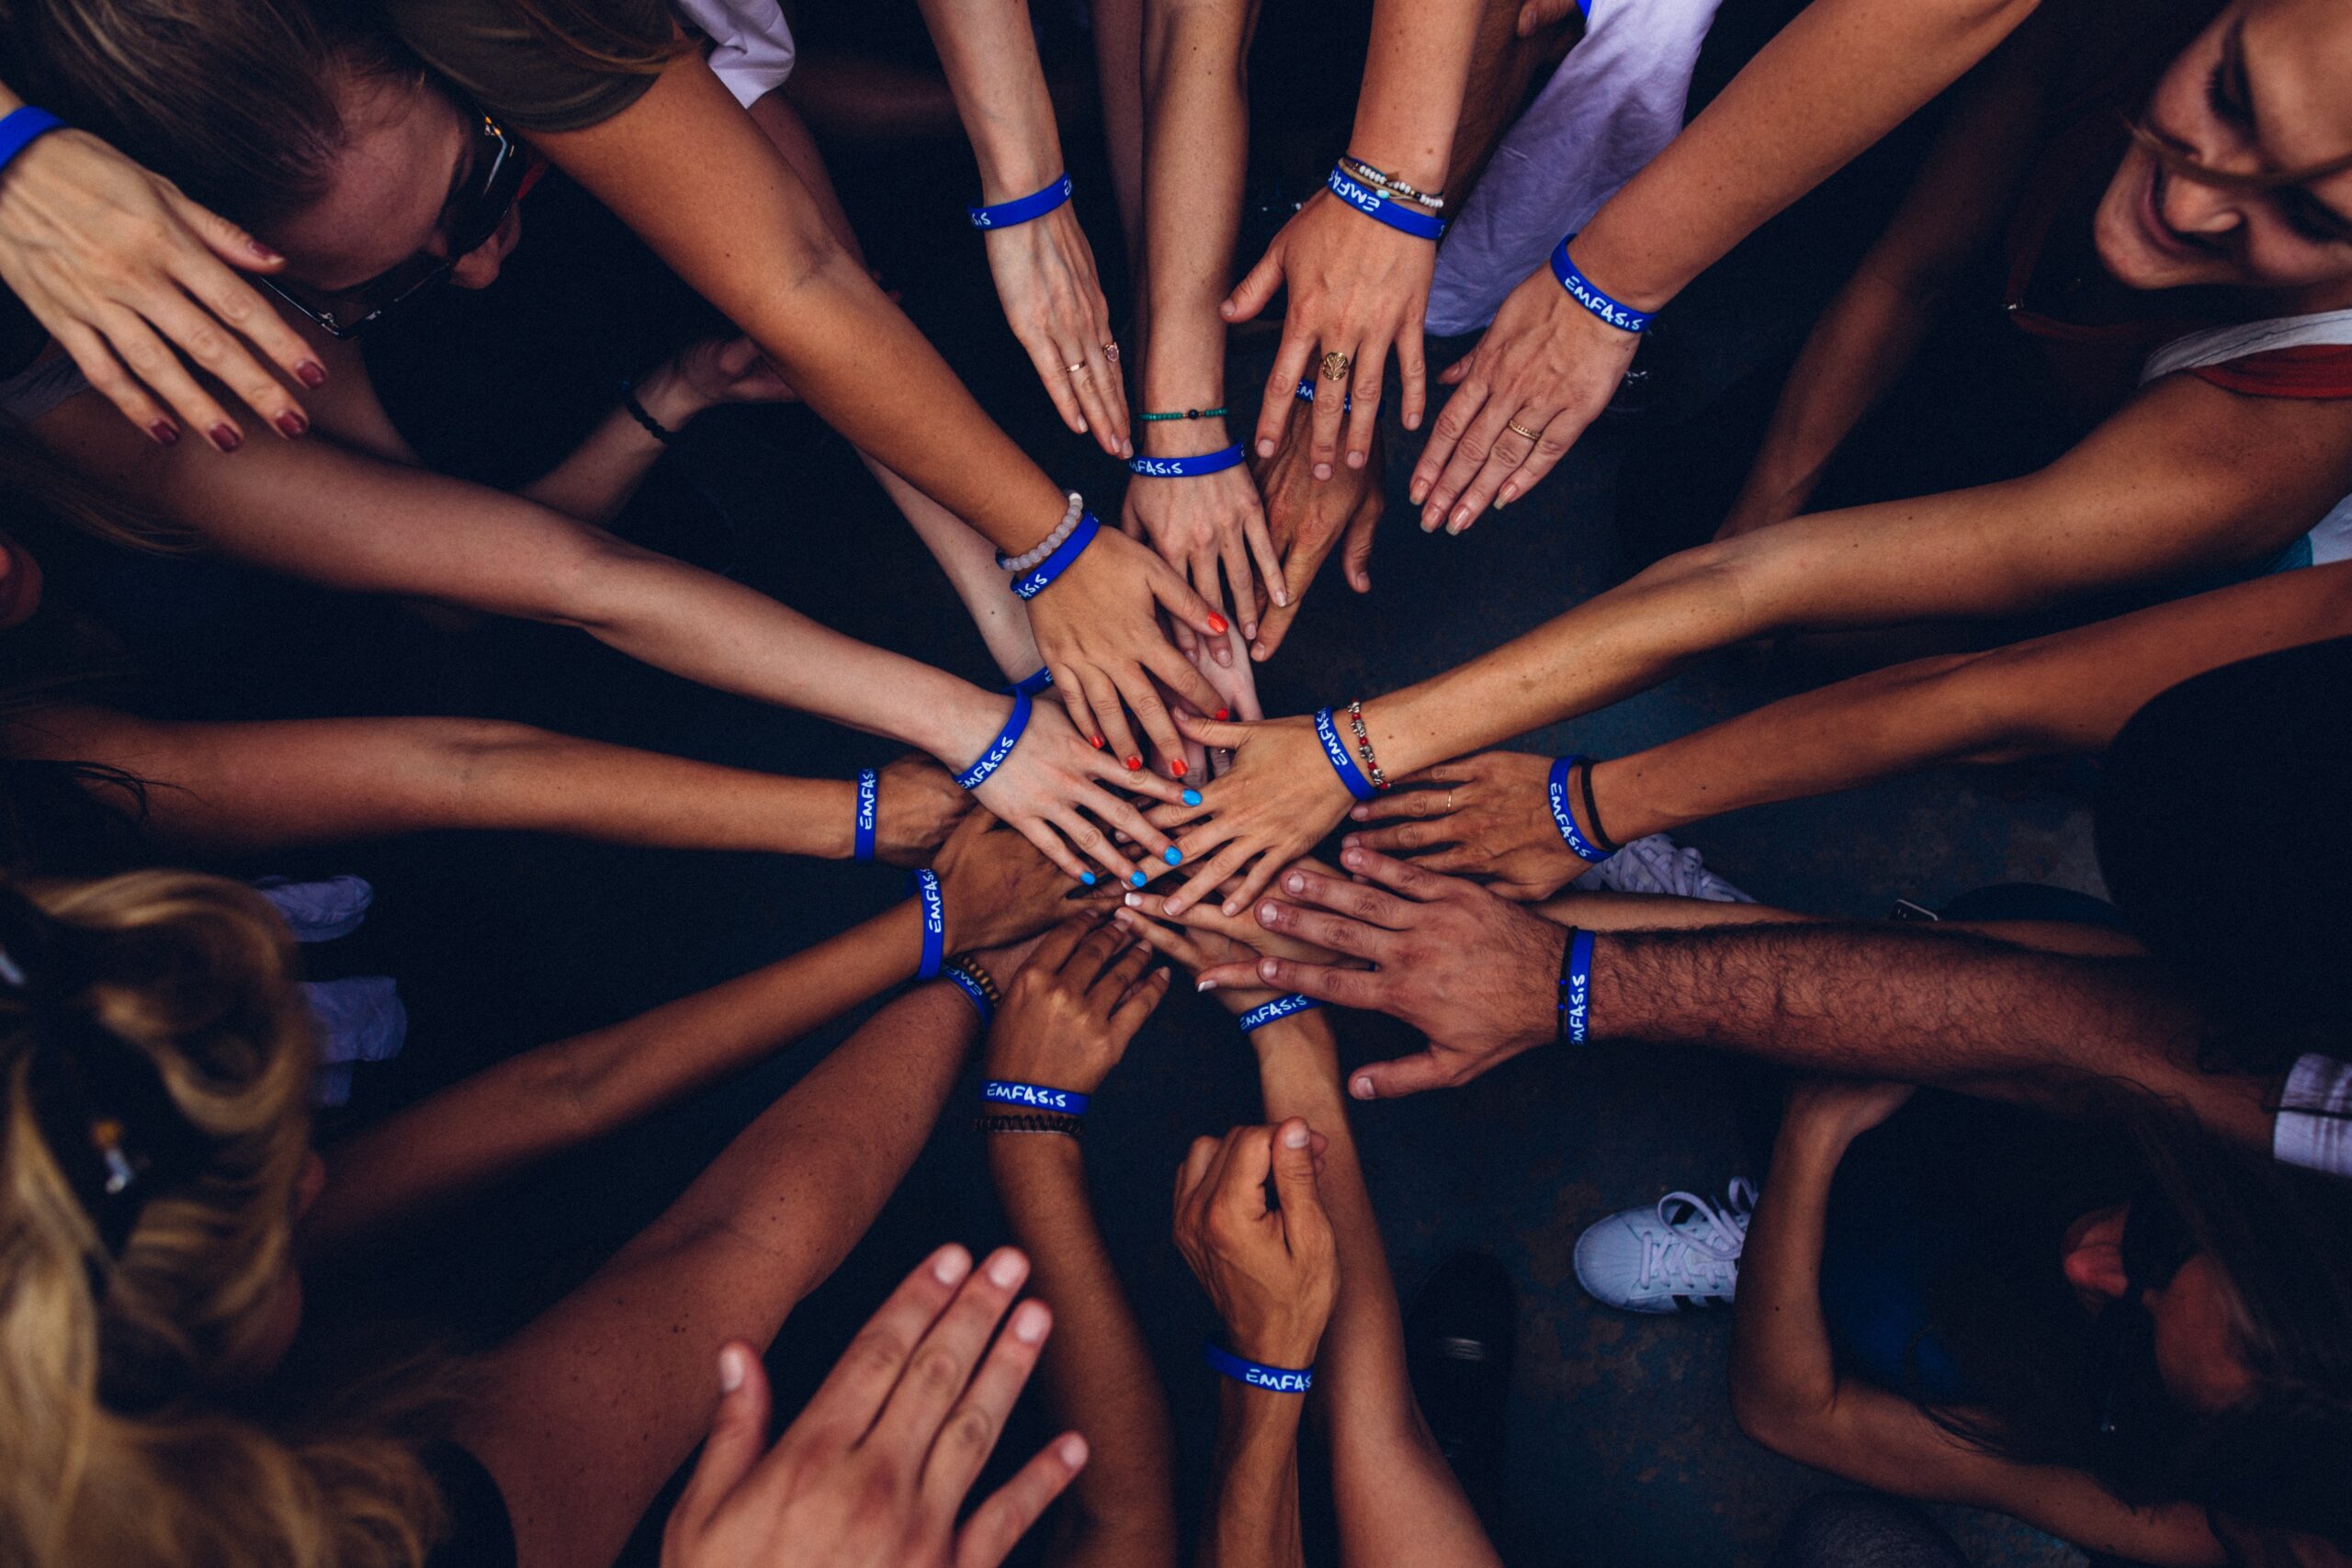 Photo of hands joined in the center of a circle huddle Photo: Perry Grone